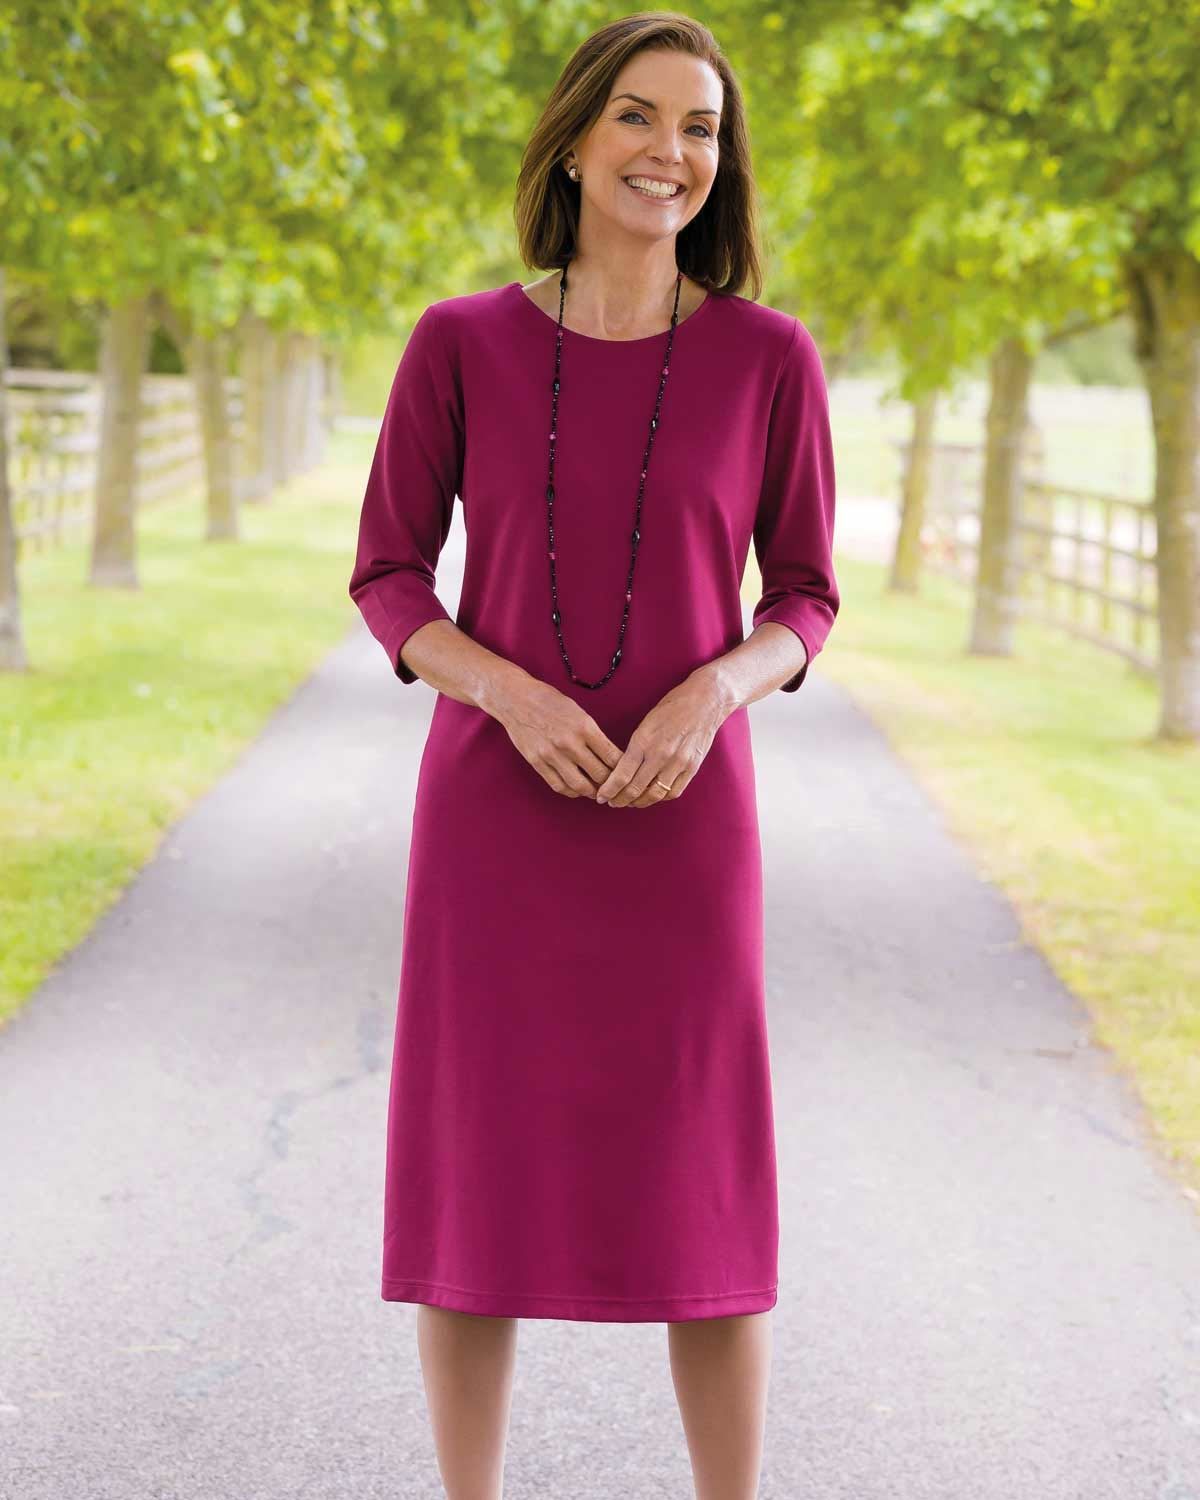 Ladies Belle Dress. In a Navy or Raspberry. Sizes 10-24